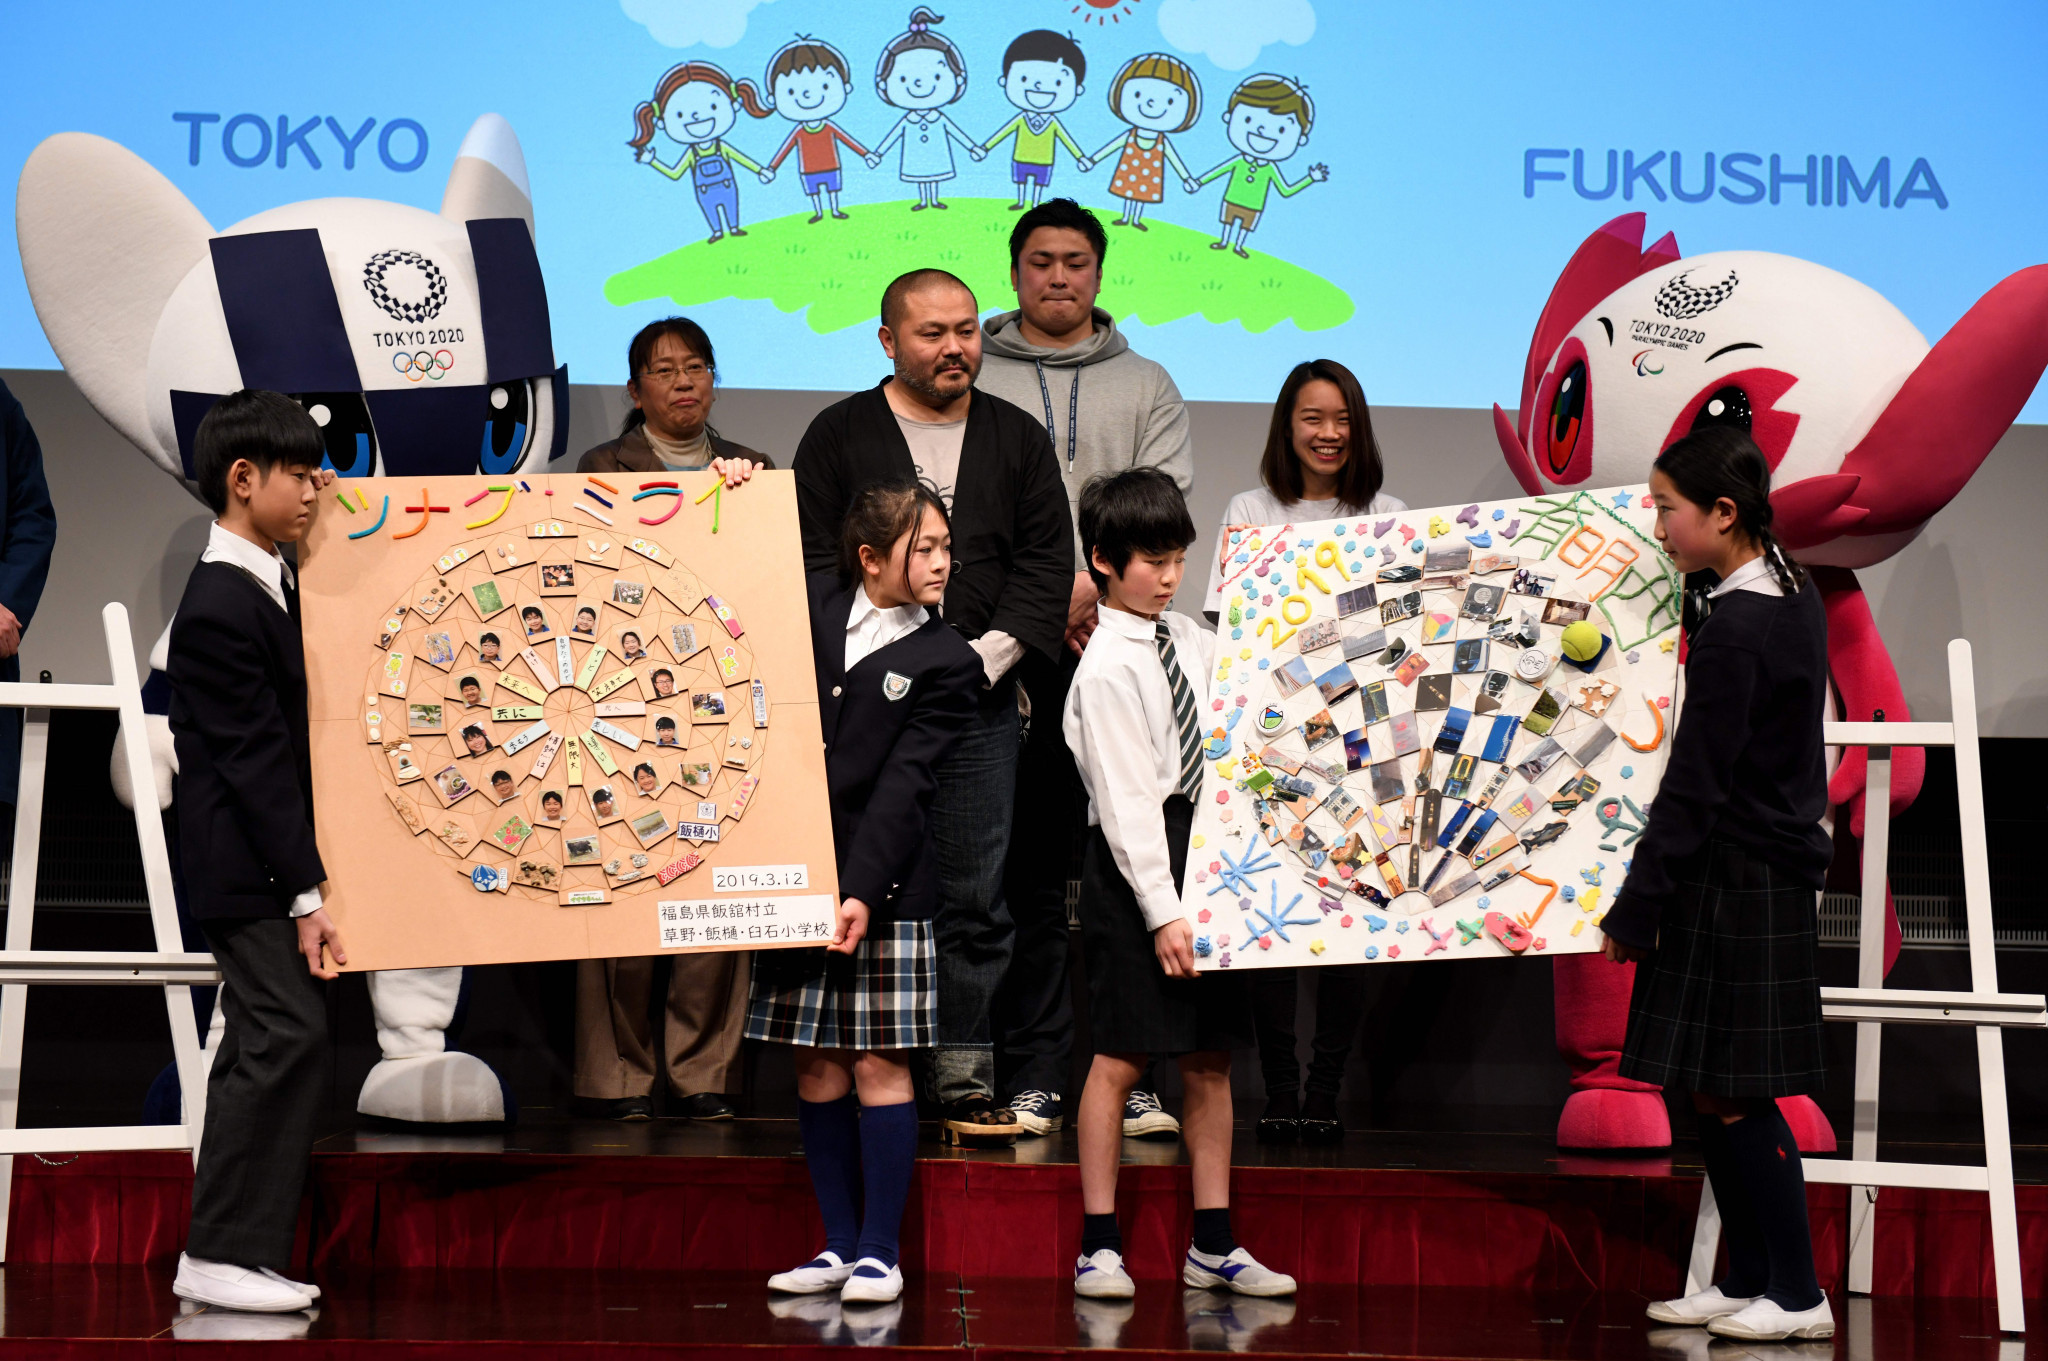 Tokyo 2020 unveil locations for special display of Olympic flame in disaster-hit areas in East Japan